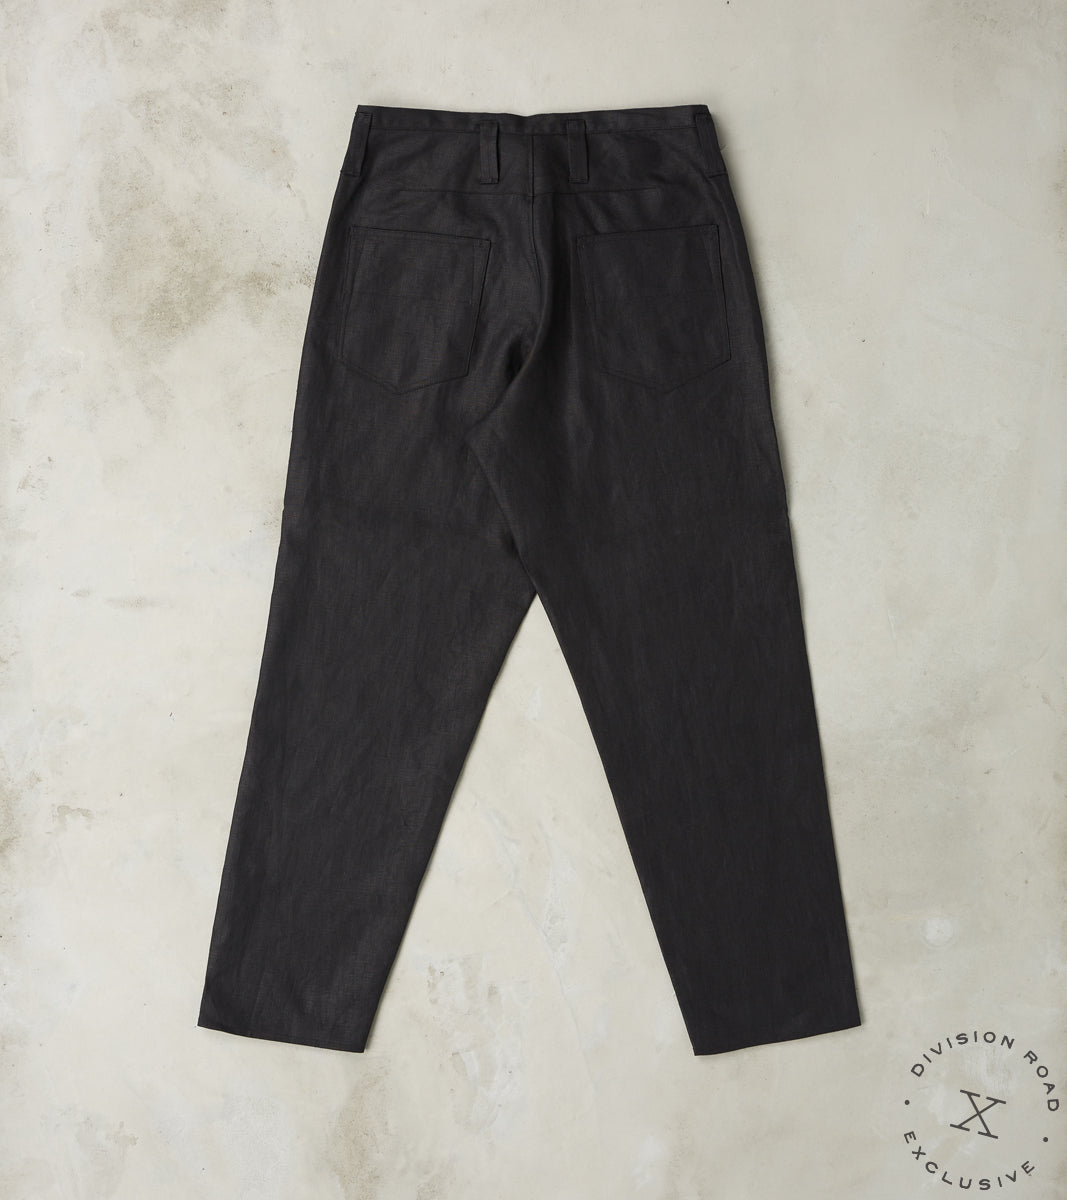 MotivMfg X DR French Work Trousers - Spence Bryson® Black Coal